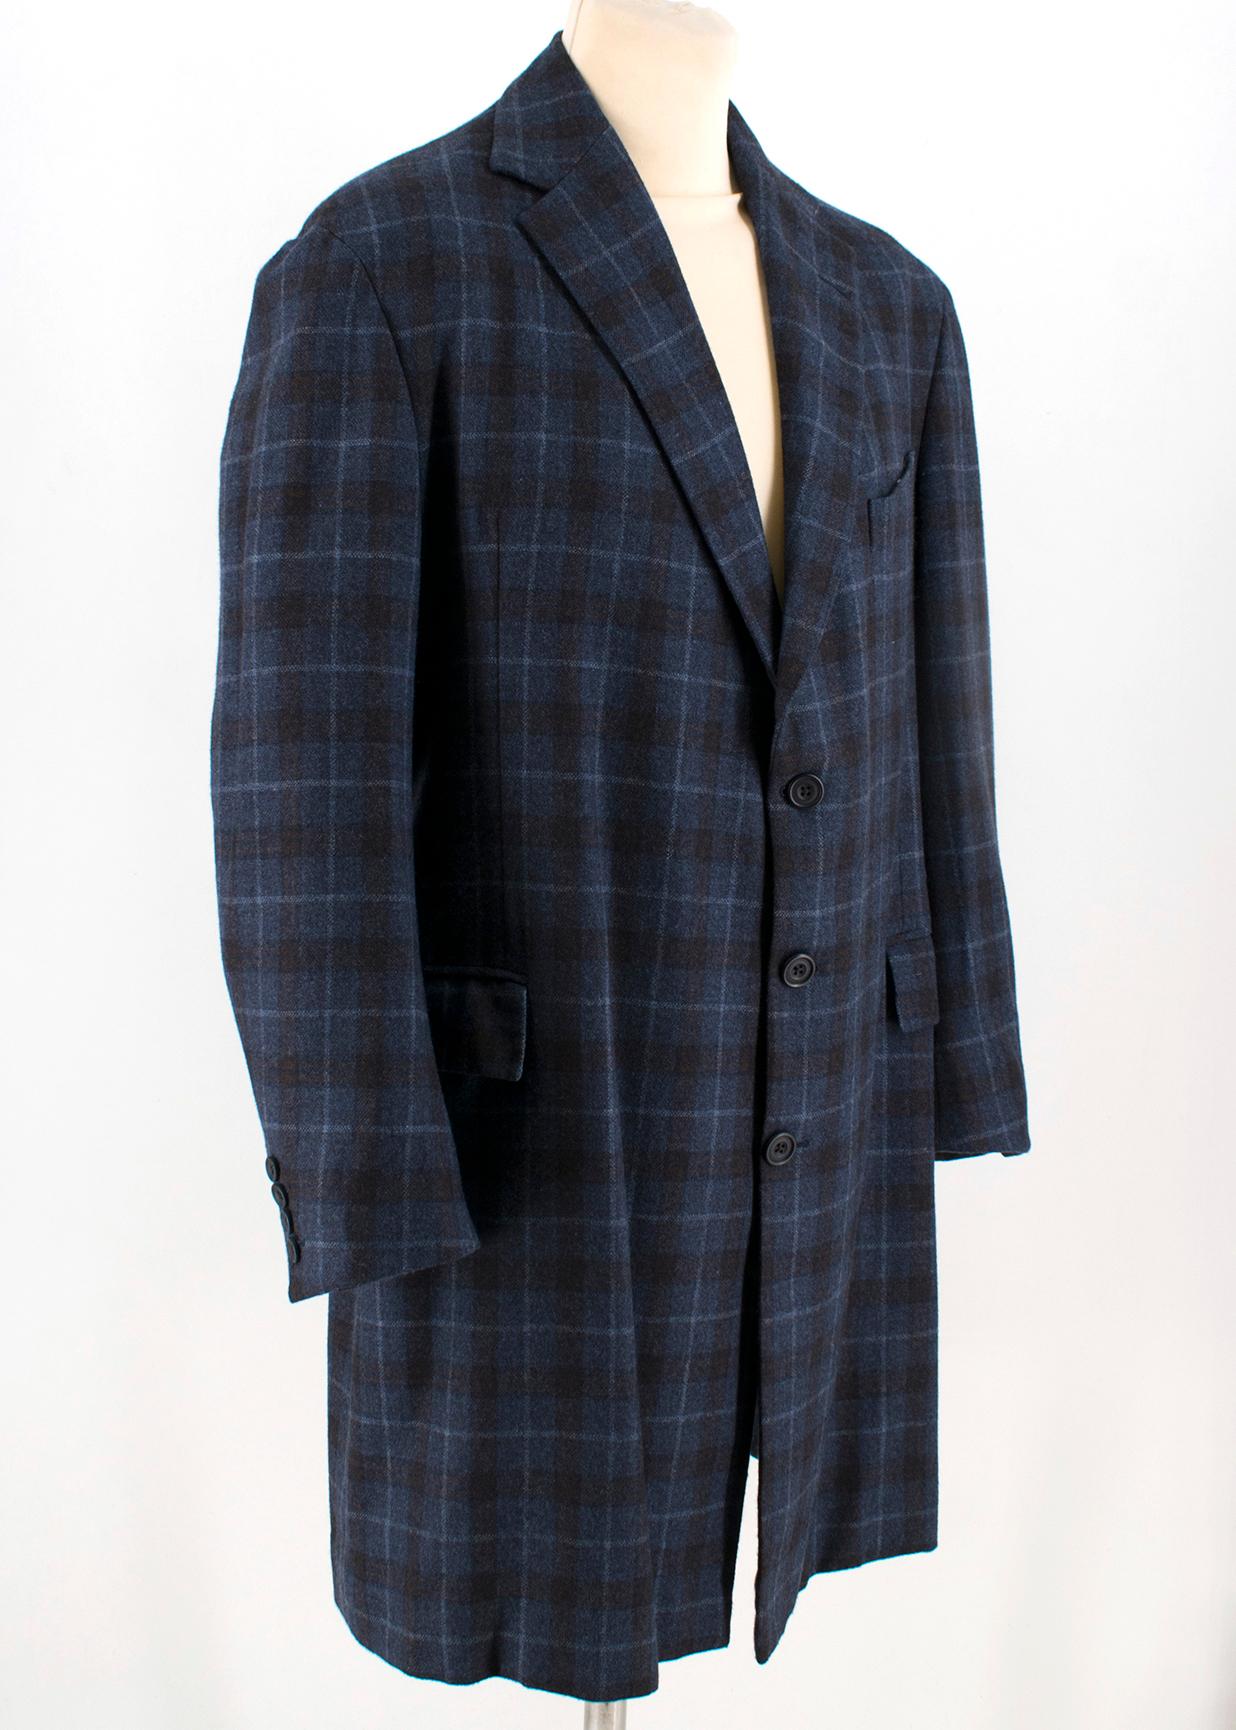 Hardy Amies Navy Blue Check Wool Men's Coat

- Made in England
- Single breasted coat
- Woven Wool
- Features two front pockets, single breast pocket (left), two interior pockets 

Please note, these items are pre-owned and may show some signs of